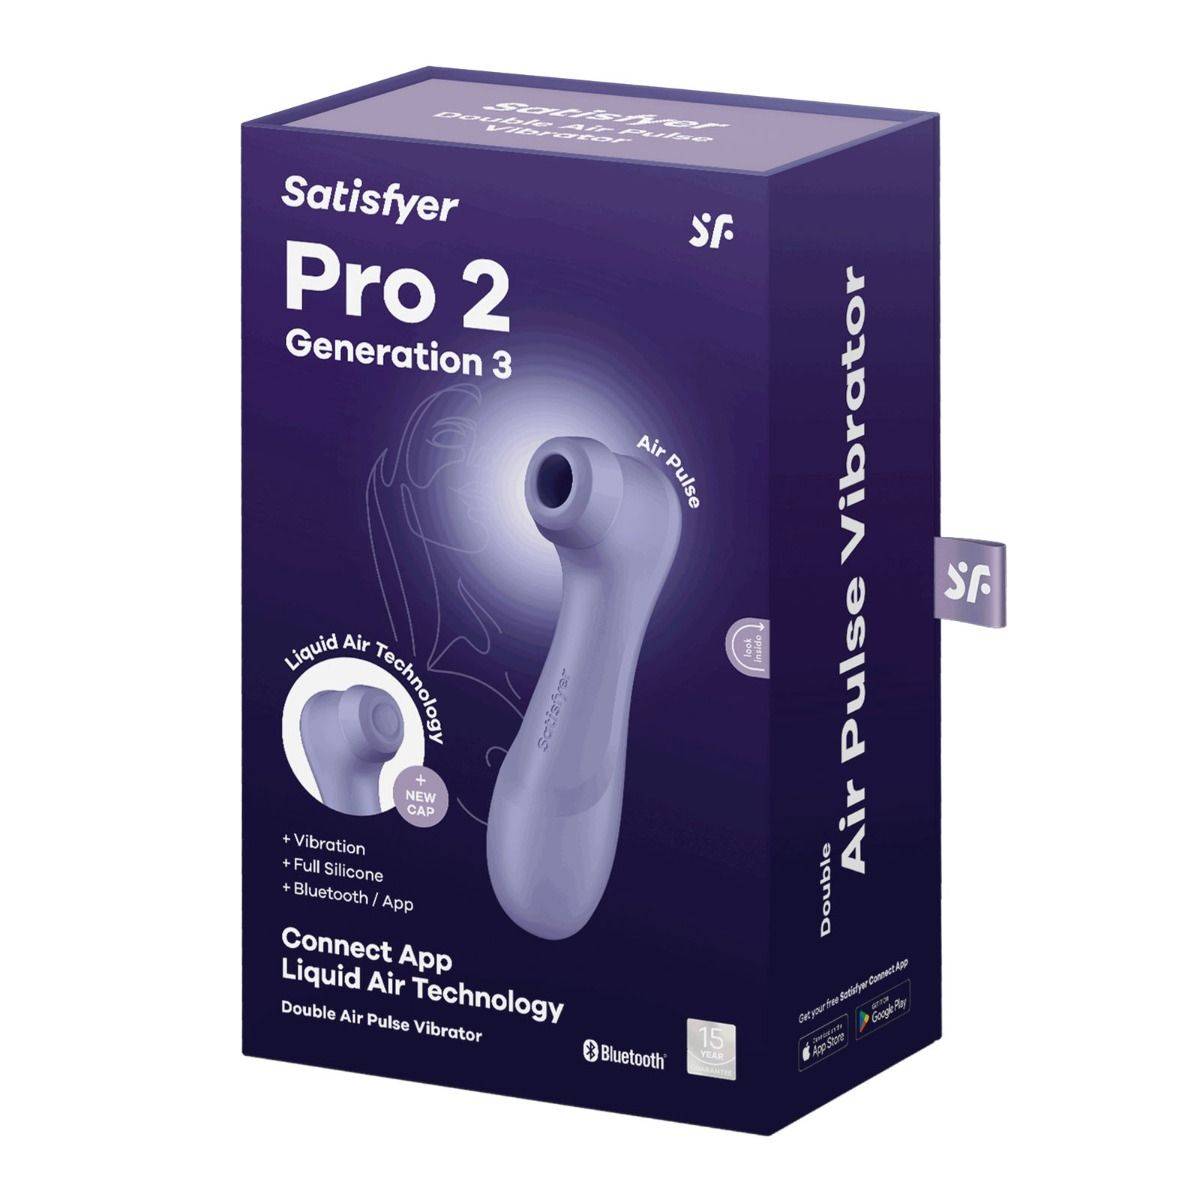 Satisfyer Pro 2 Generation 3 Liquid Air Technology With Connect App Double Air Pulse Vibrator Lilac